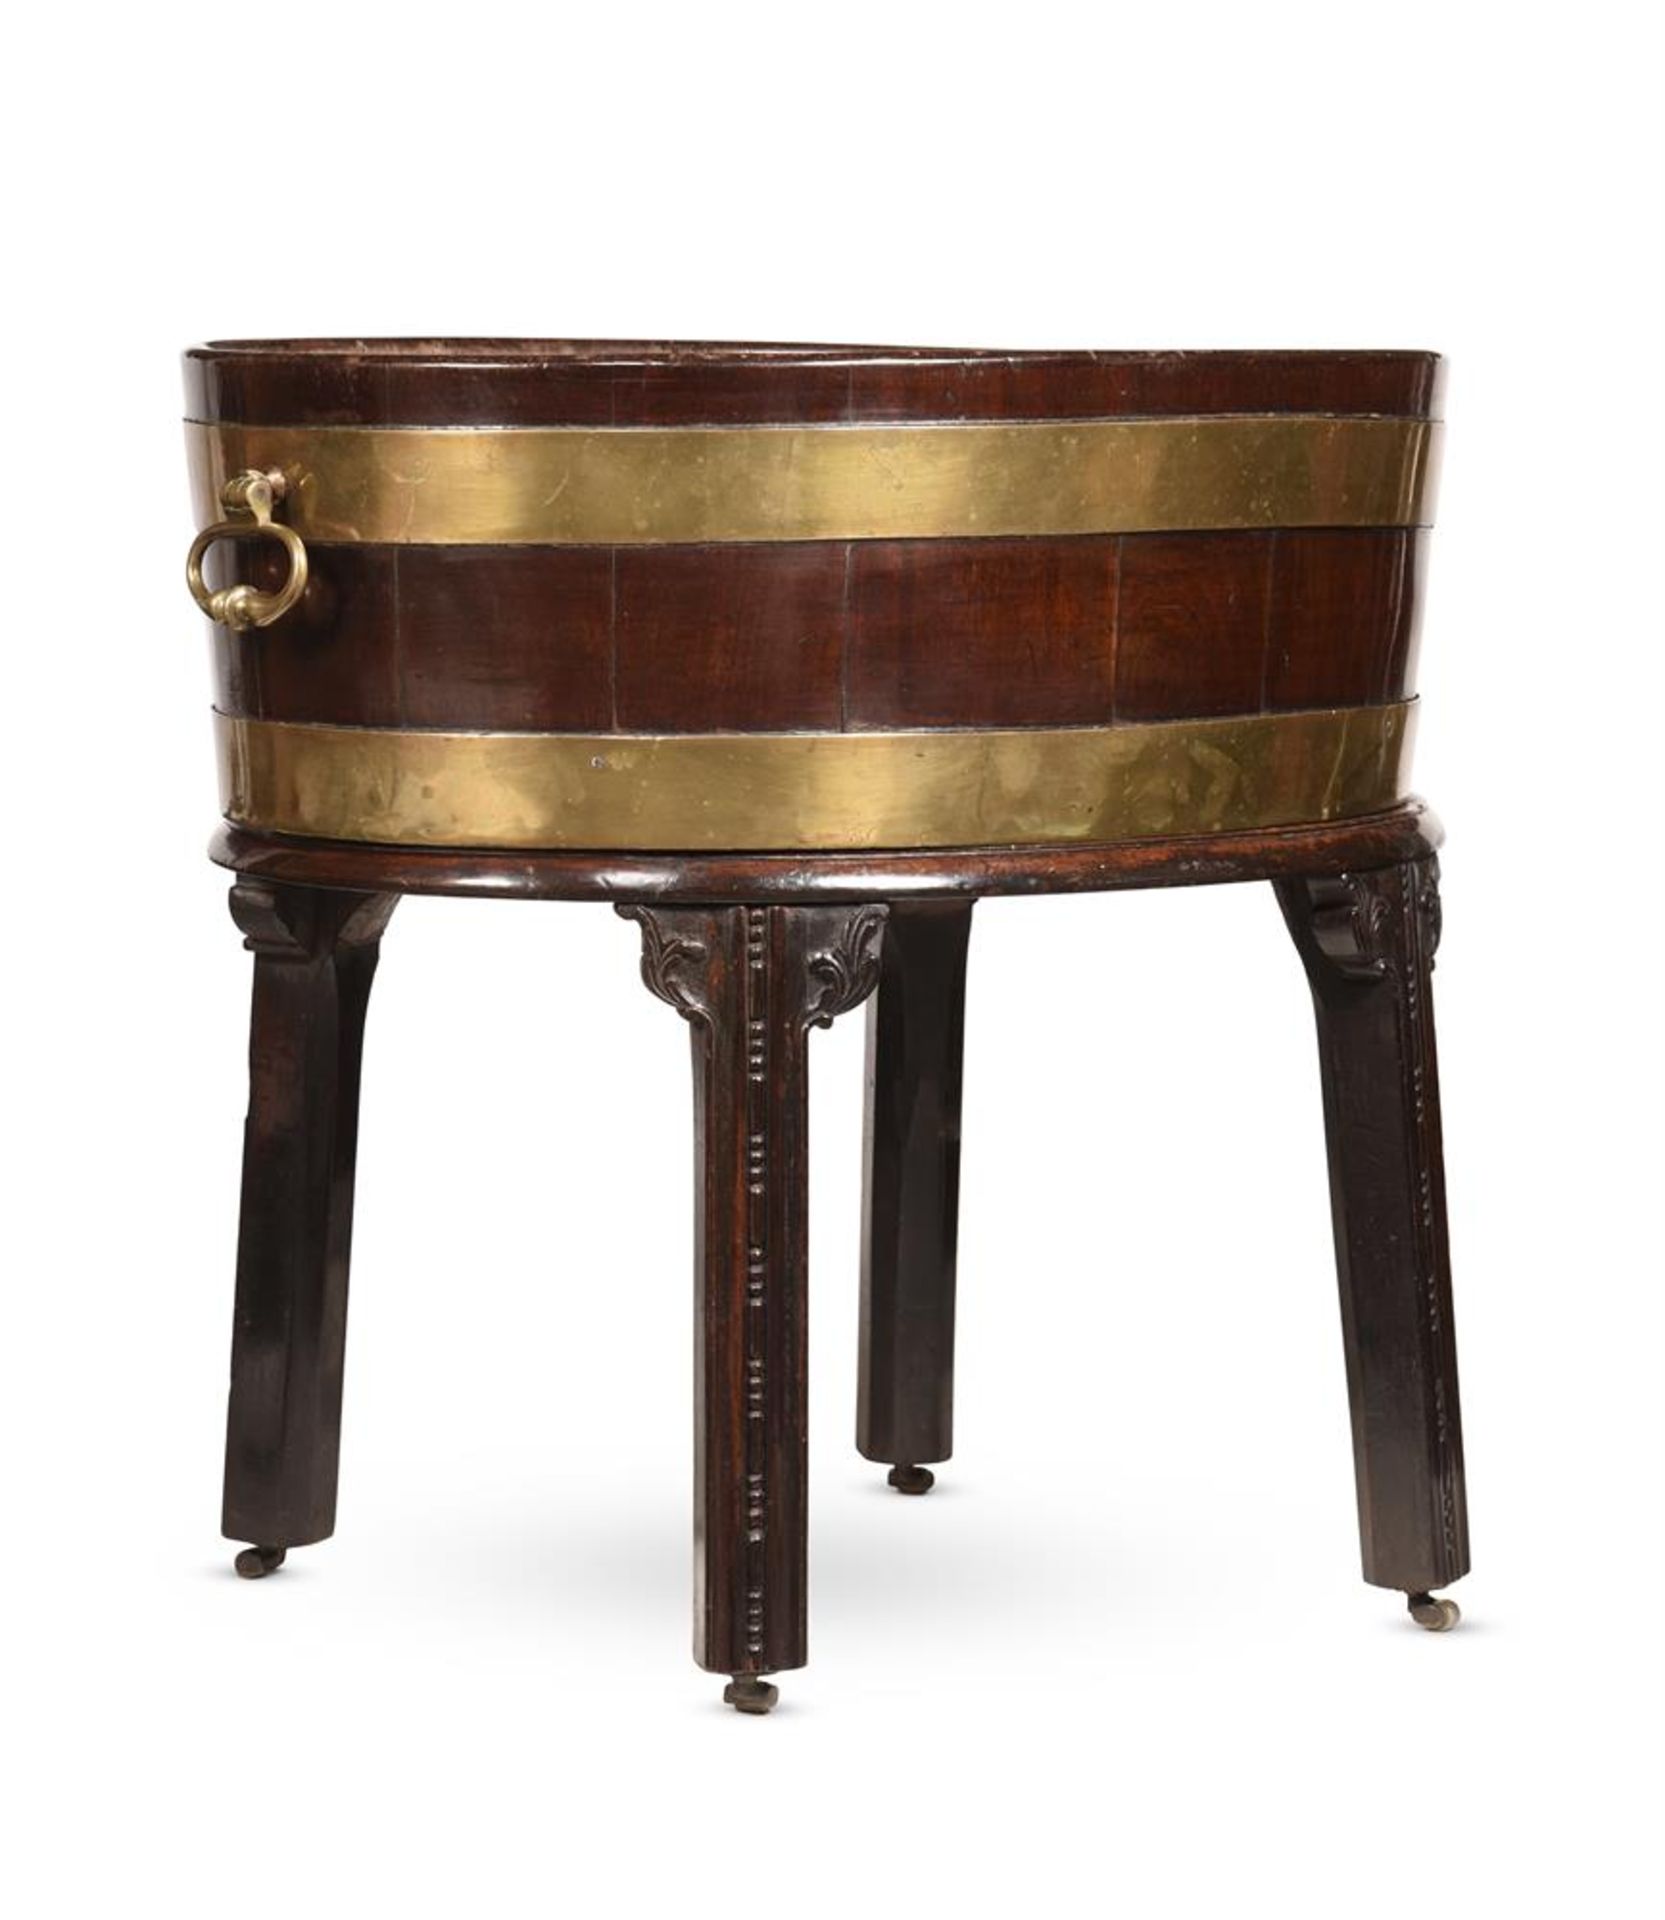 A GEORGE III MAHOGANY AND BRASS BOUND WINE COOLER, CIRCA 1760 - Image 2 of 3